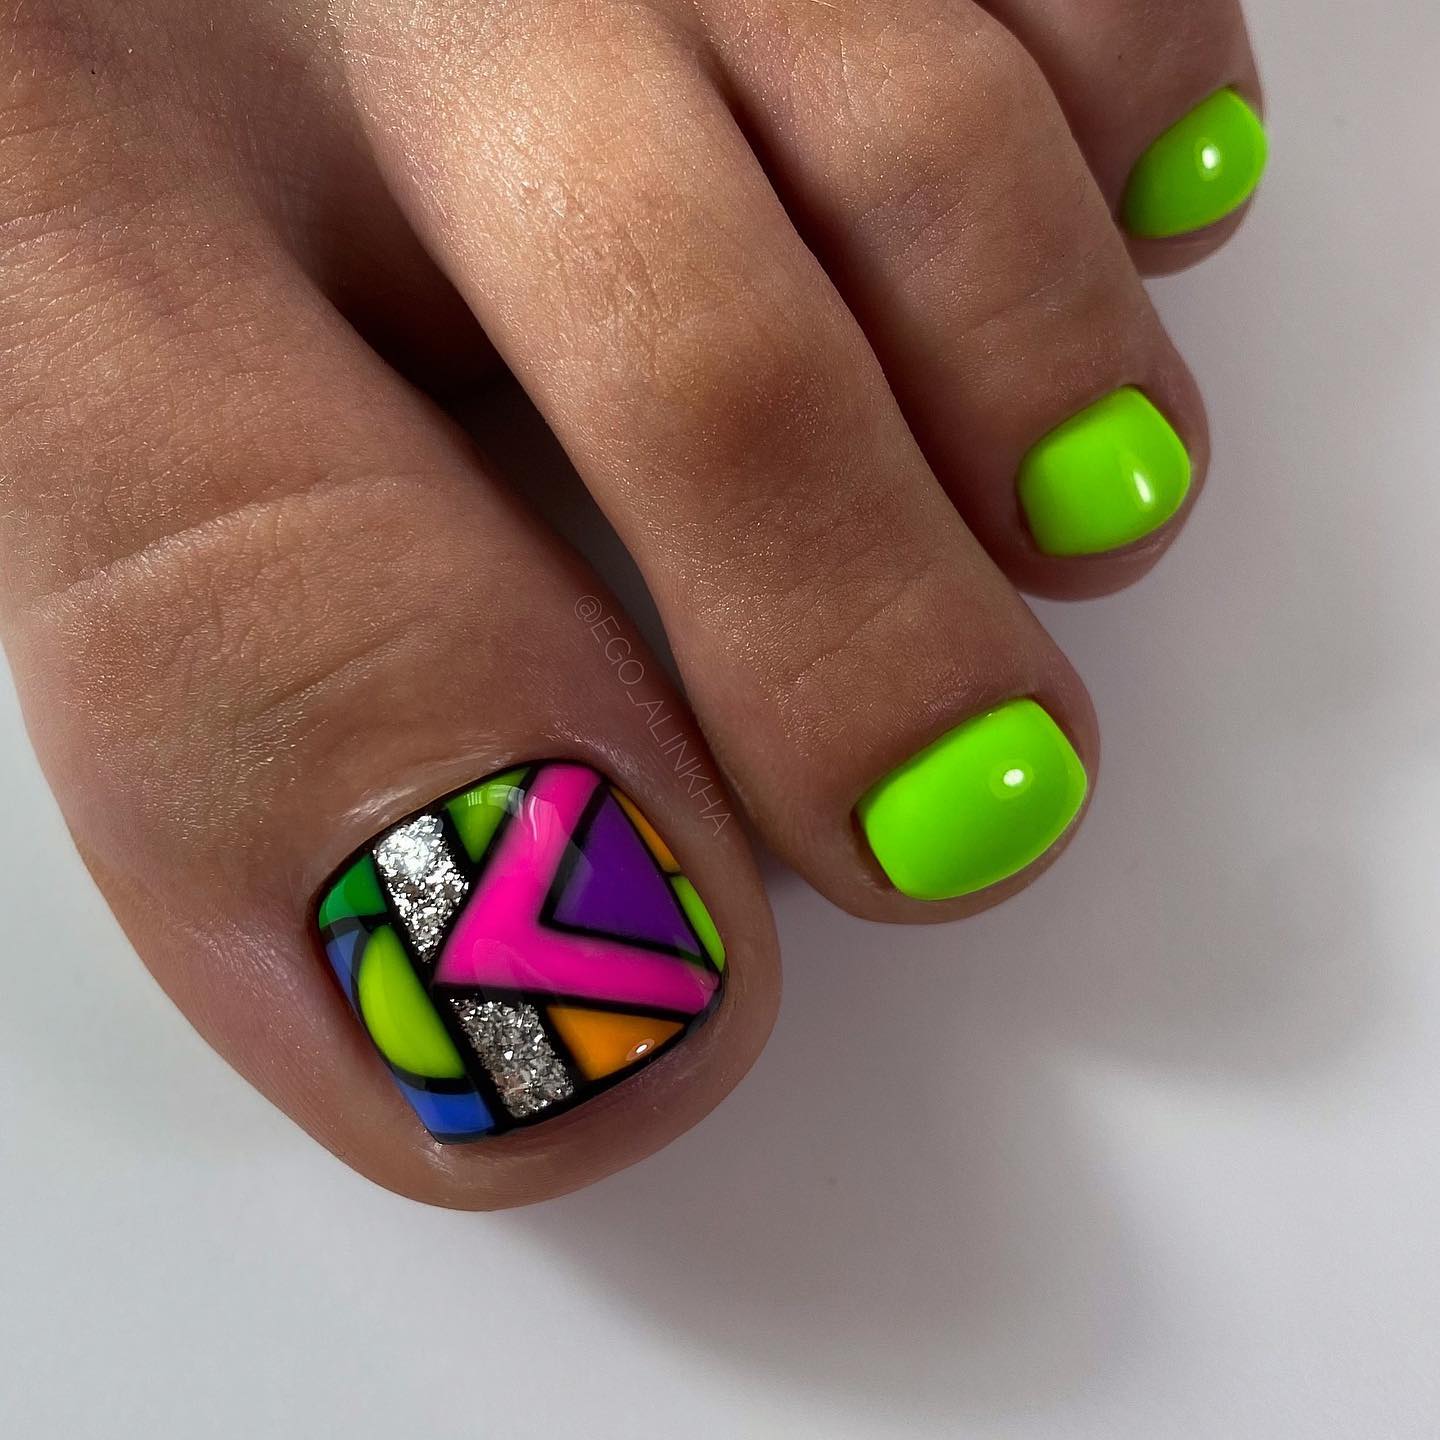 Bright Green Toe Nails with Colorful Design on Big Toe